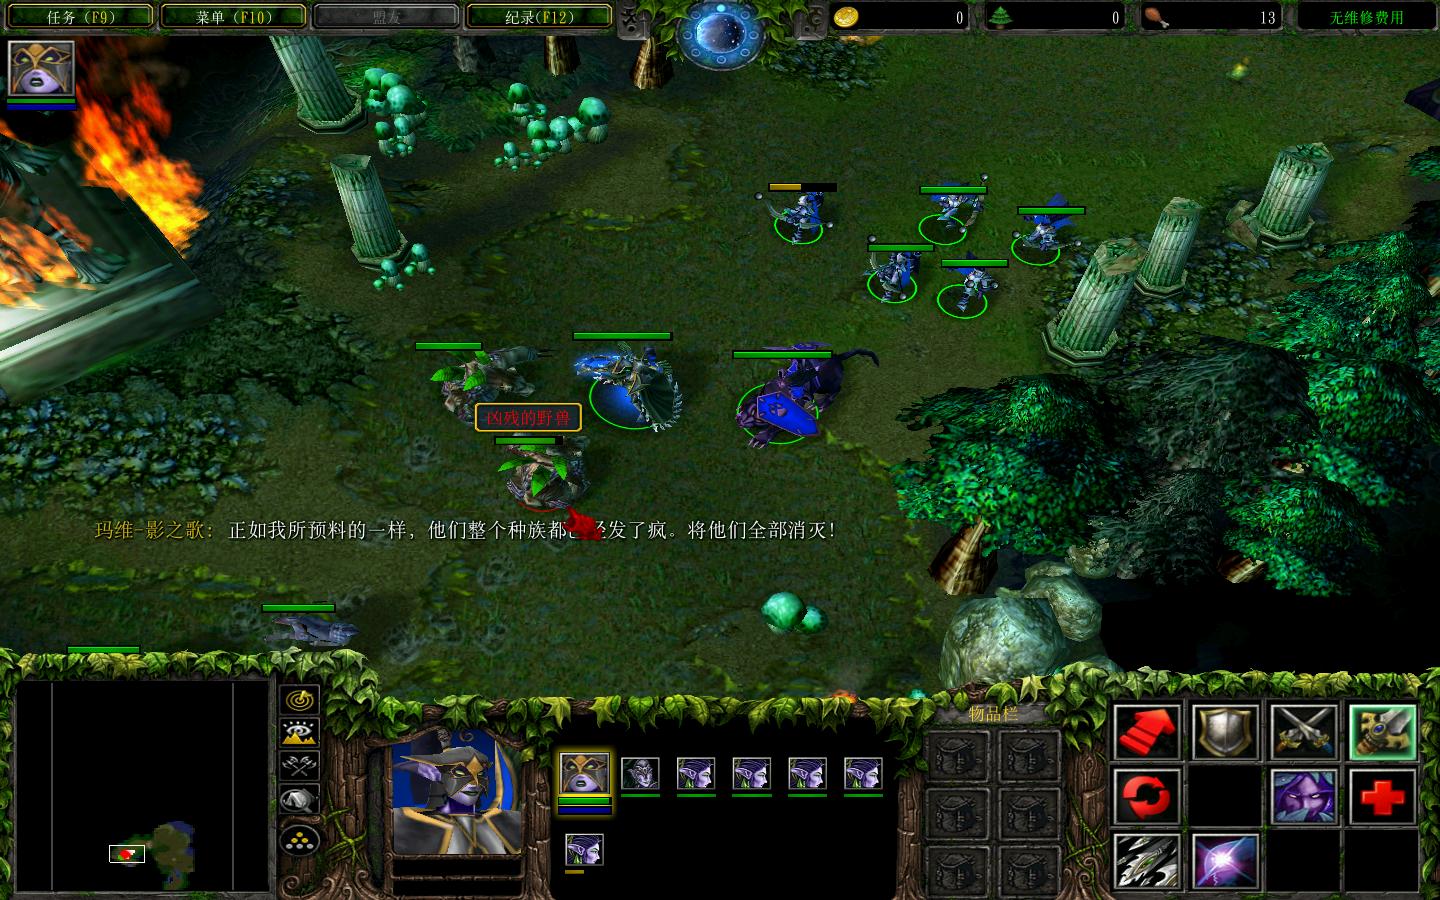 ħ3Warcraft III The Frozen ThroneV2.3֮ĩ